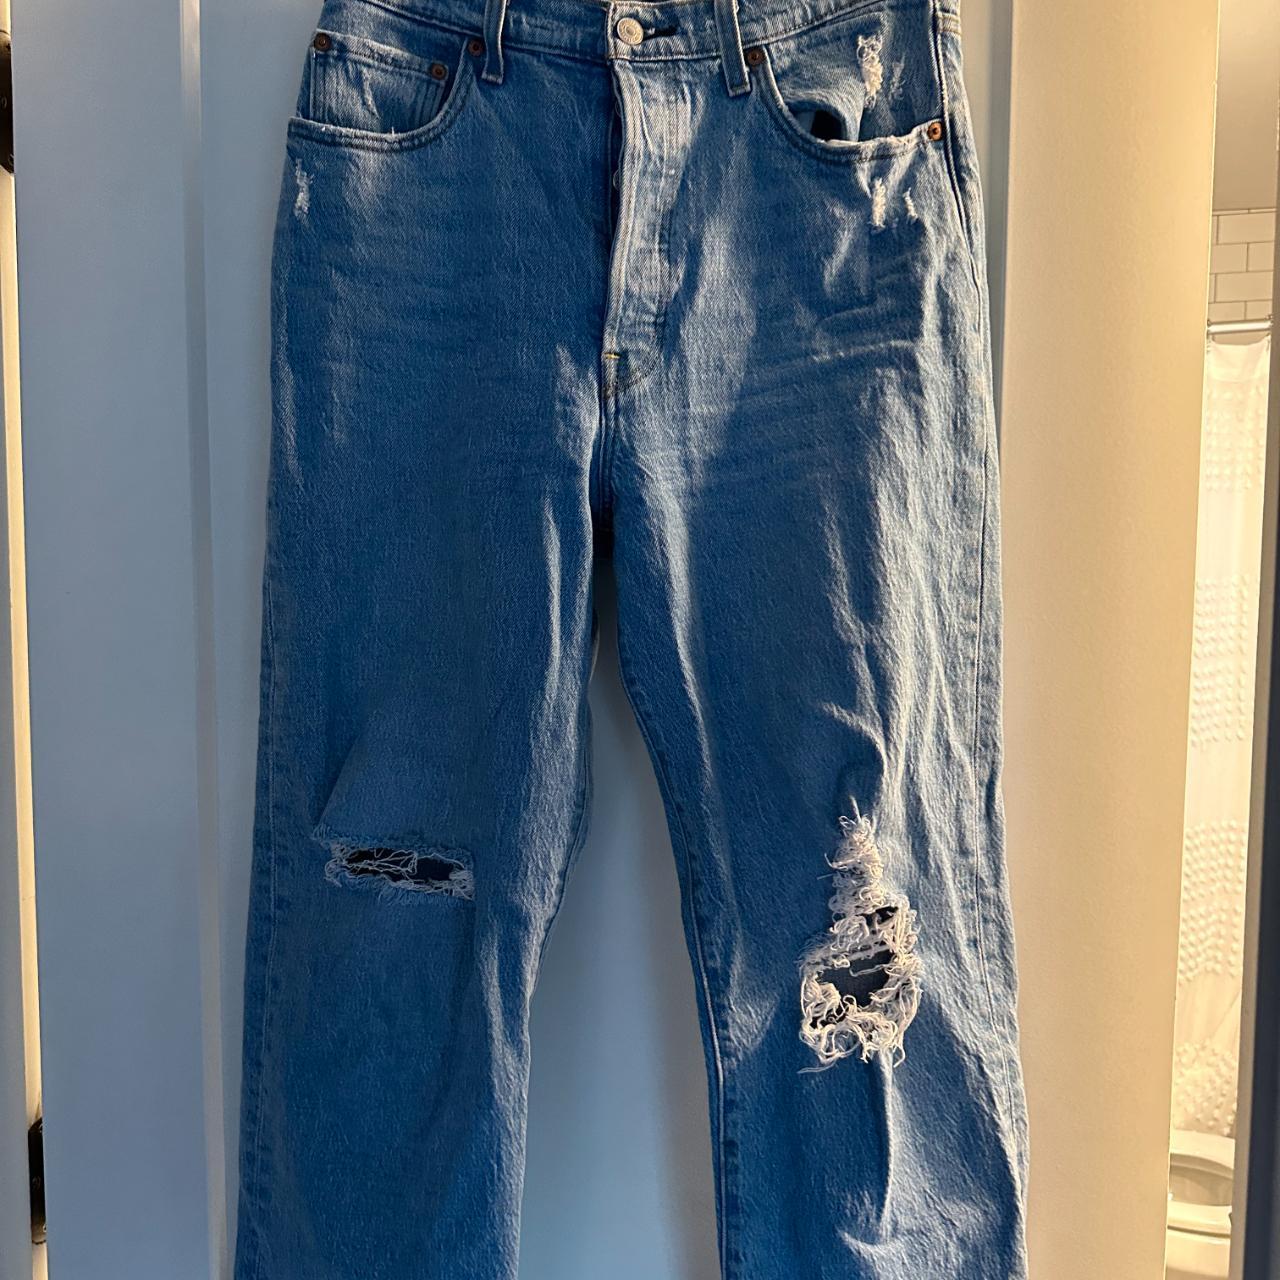 Levi's Ribcage Straight ankle jean in size 29